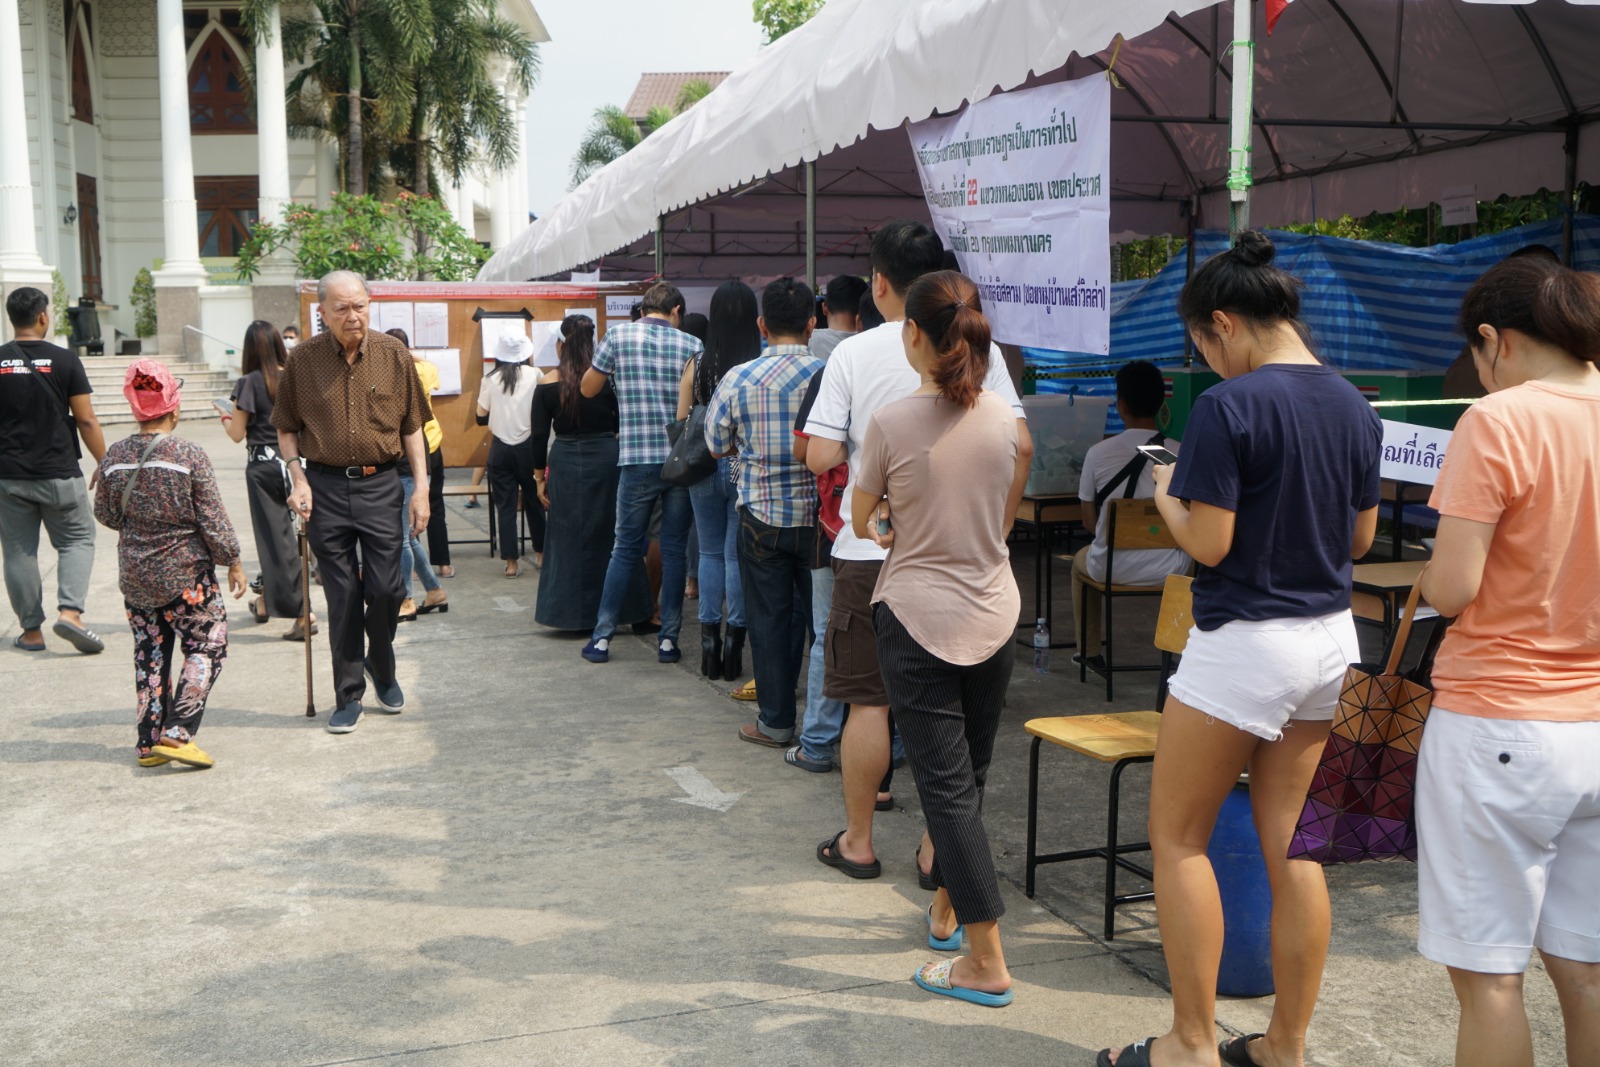 Voters and a Bangkok polling station. Photo: Teirra Kamolvattanavith/ Coconuts Media